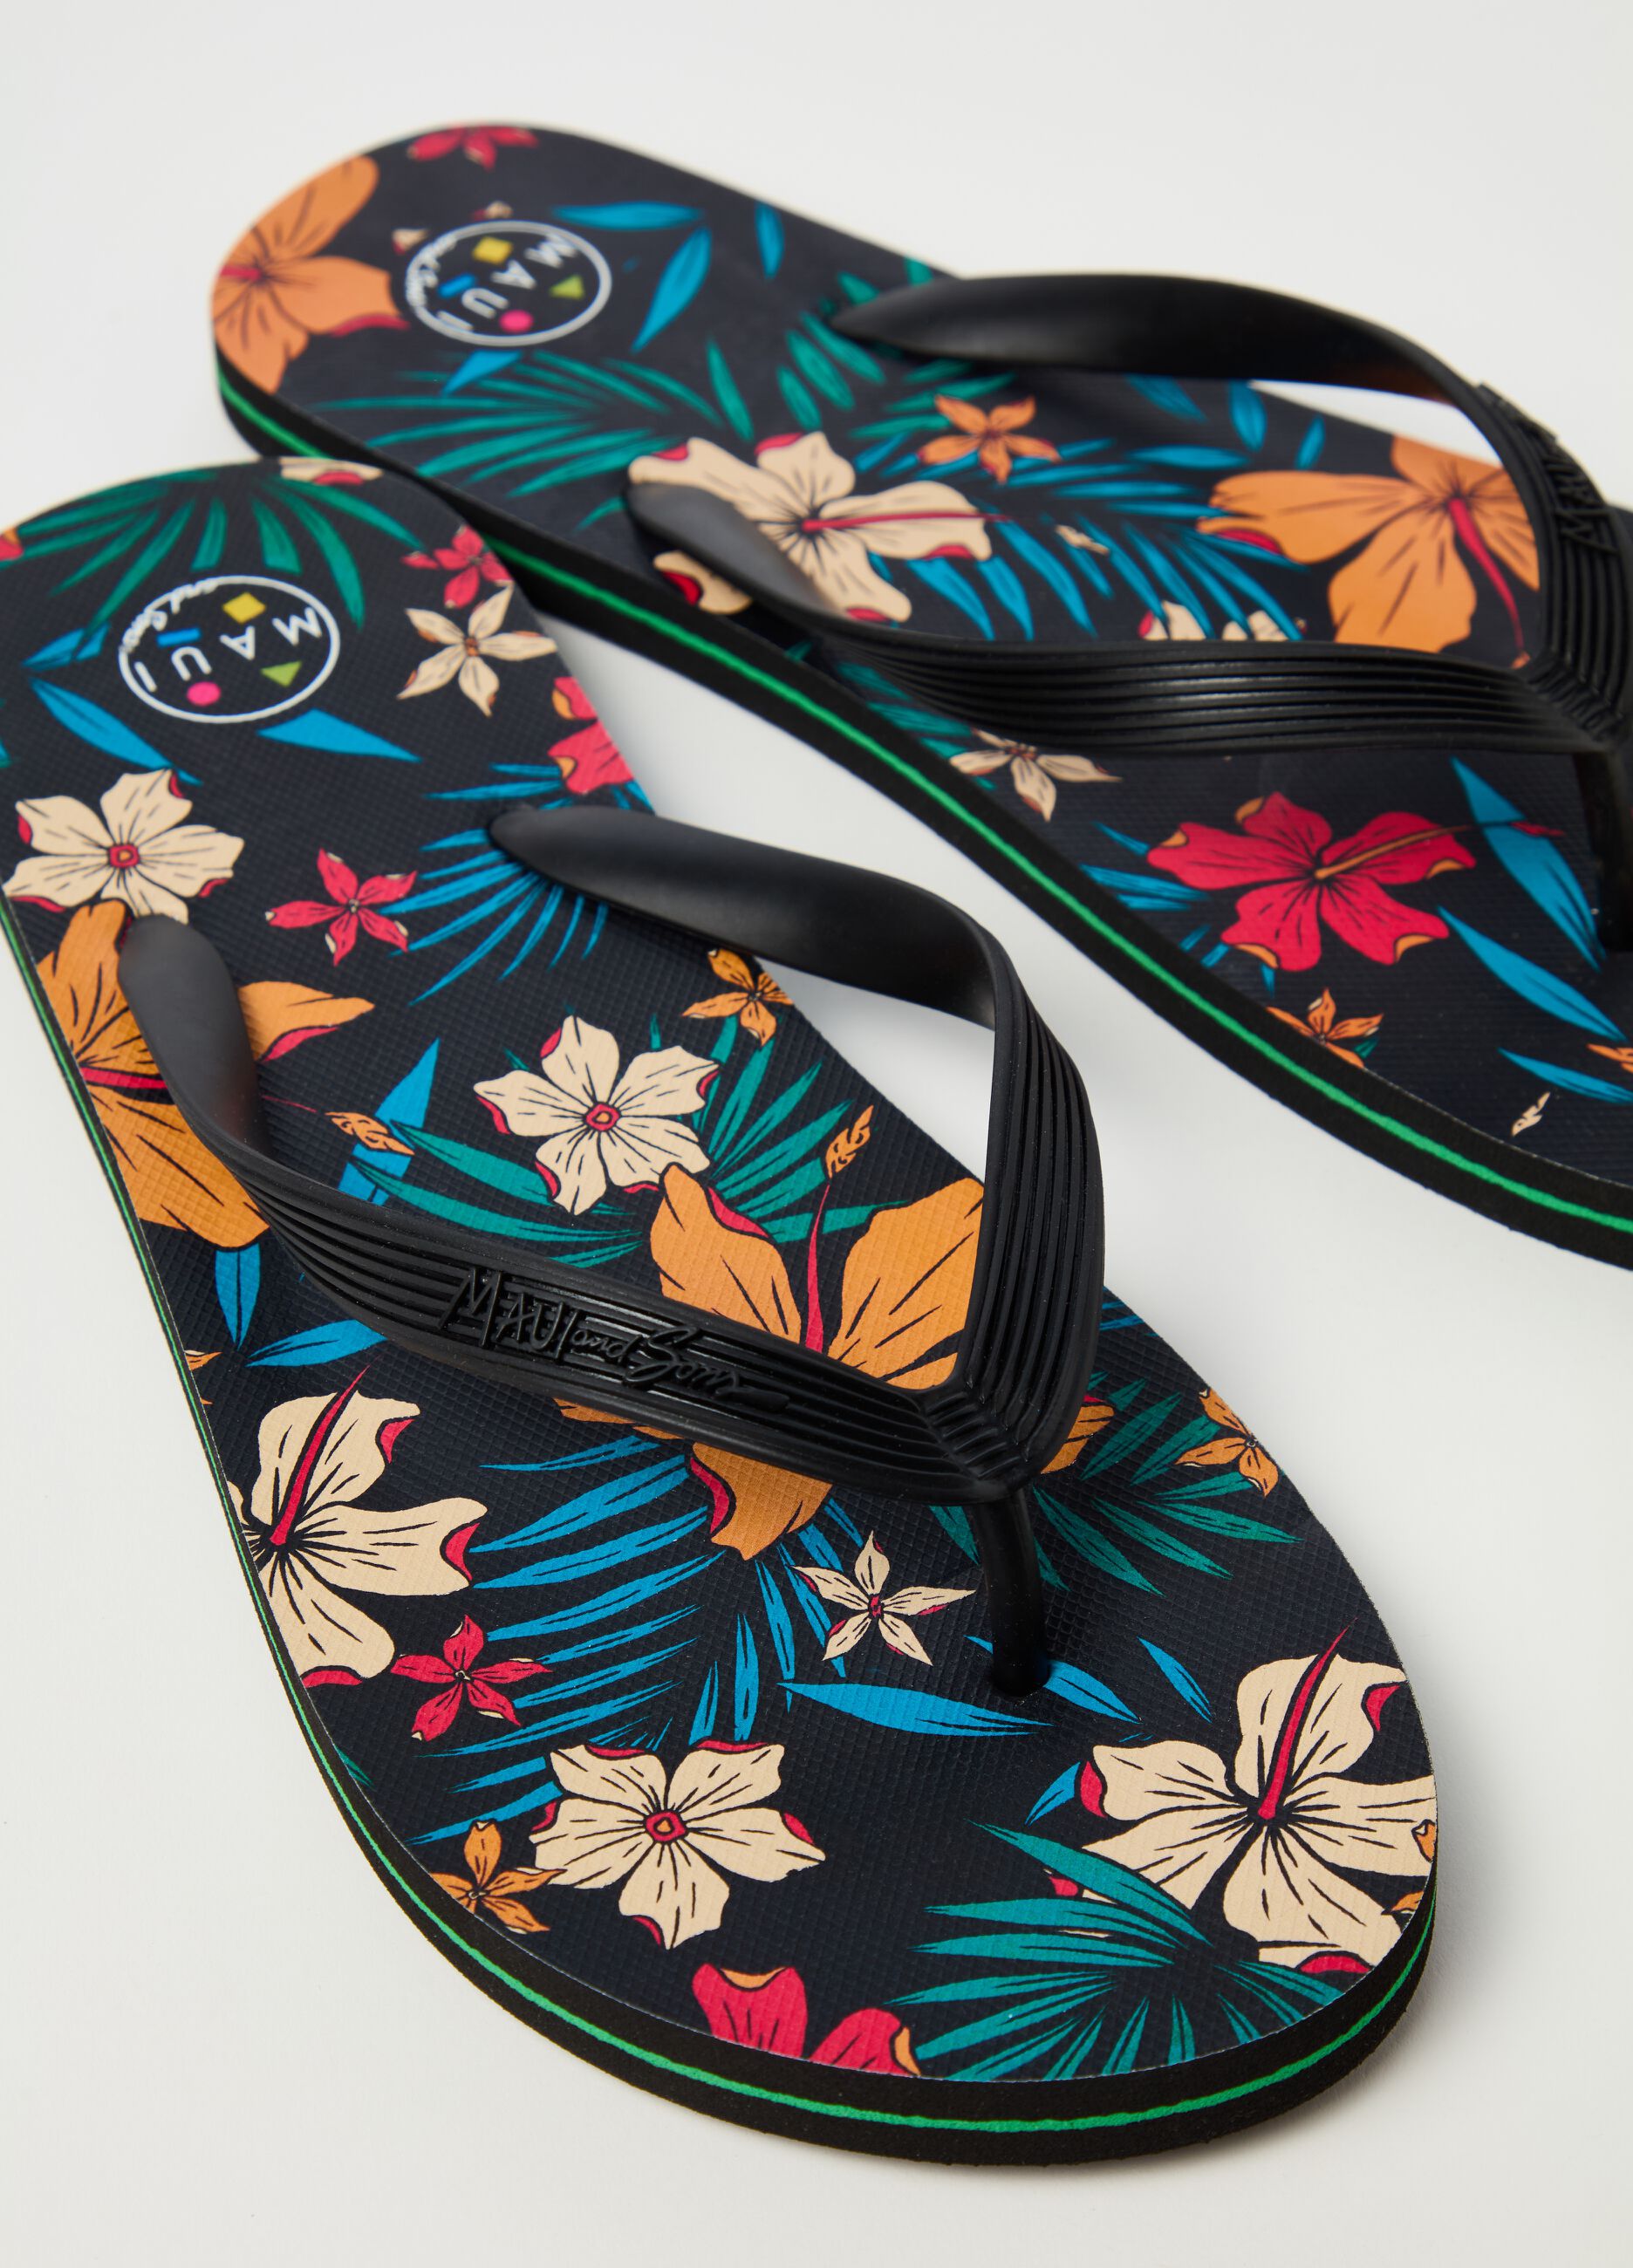 Thong sandals with floral print